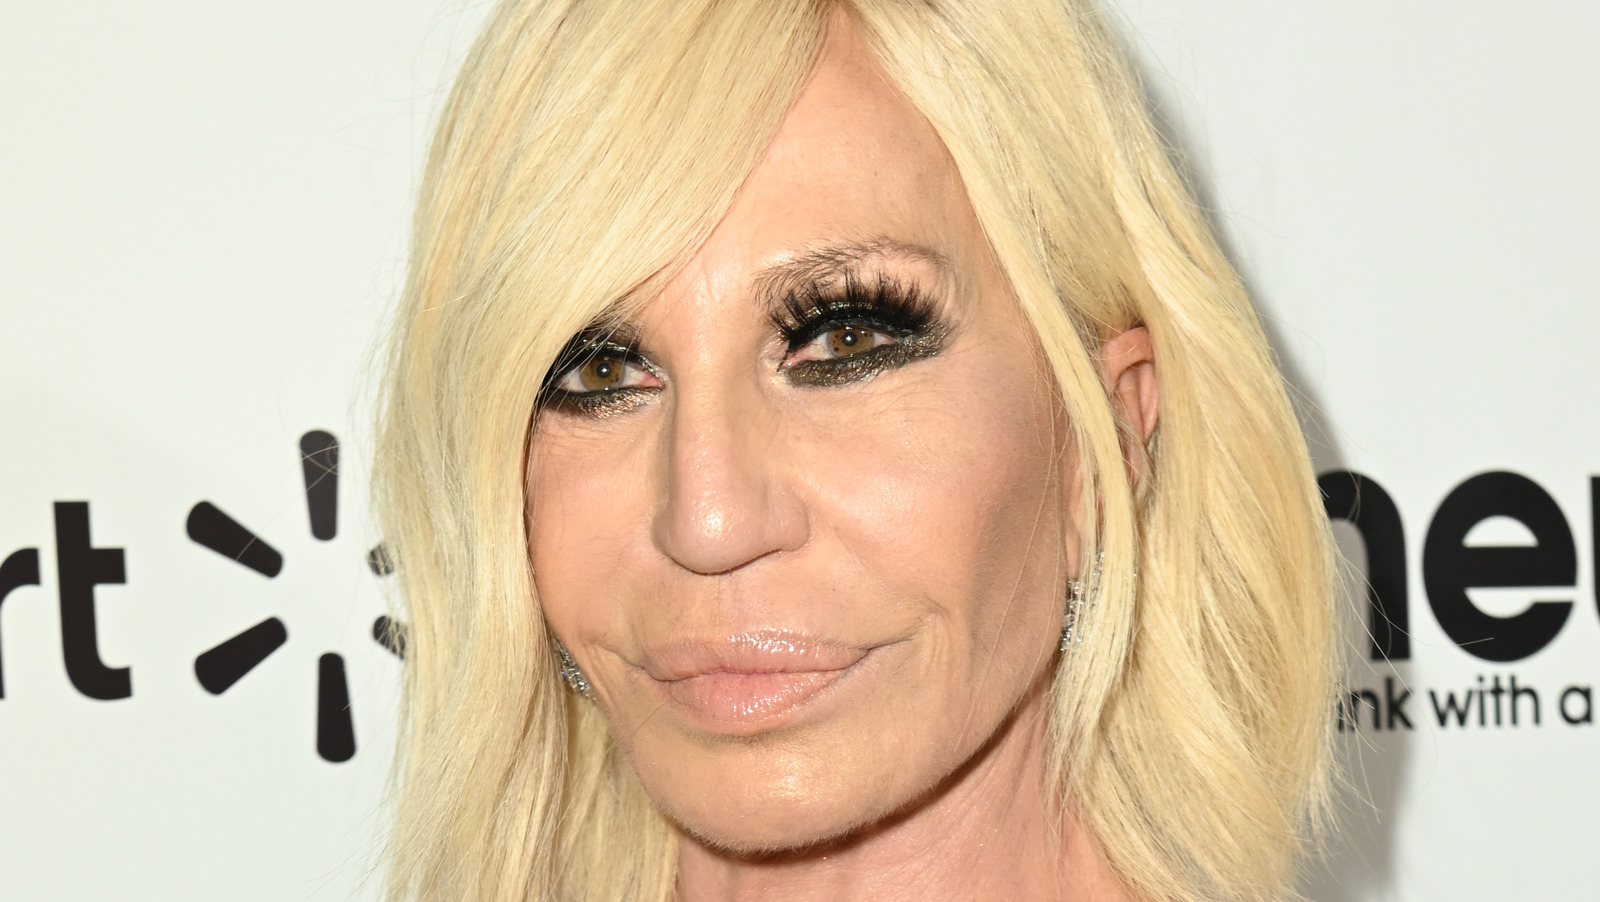 Donatella Versace: Britney Spears in 'amazing state of mind